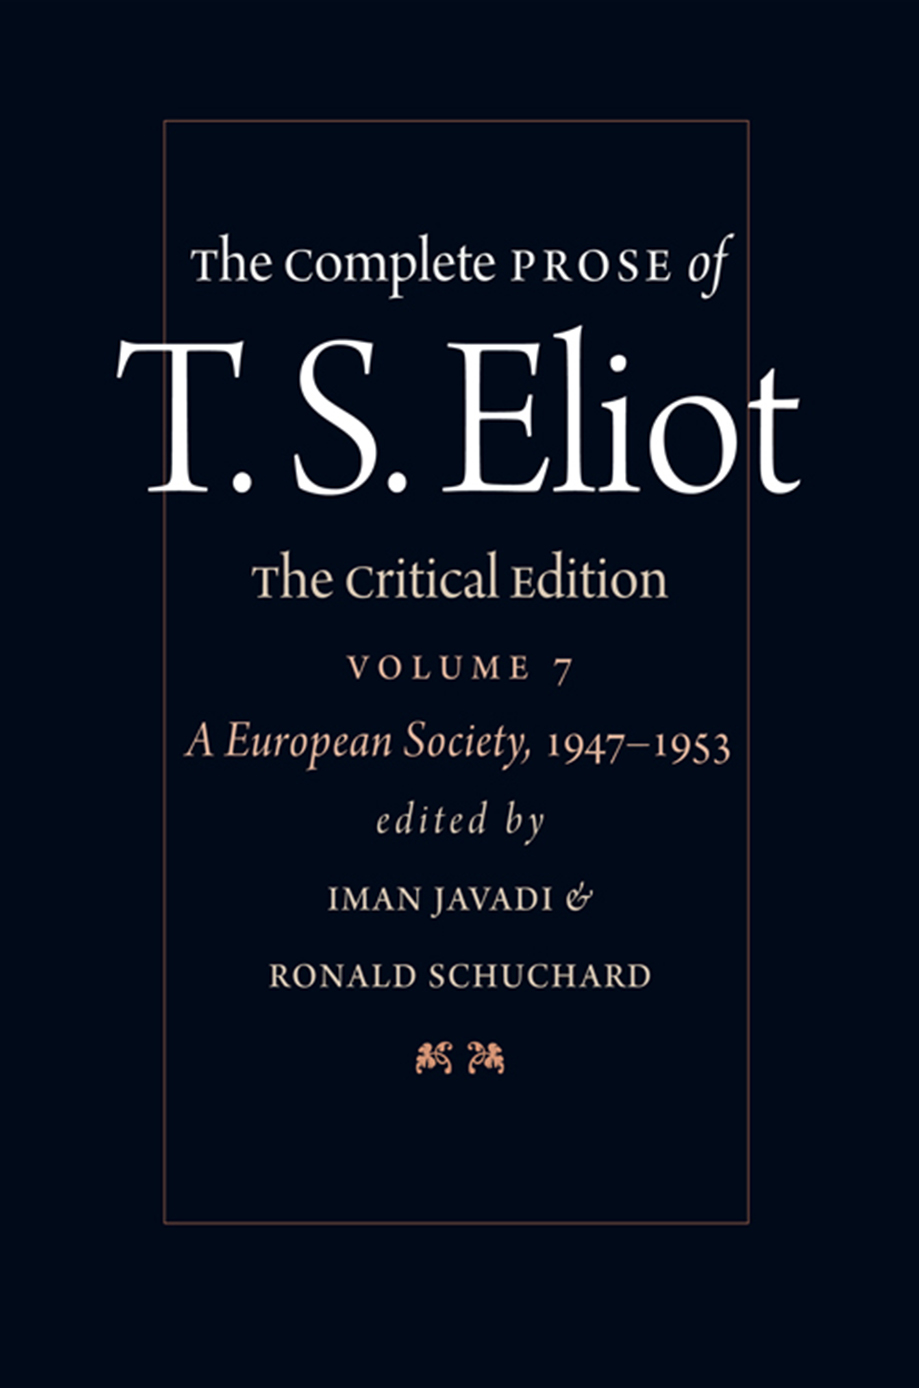 The Complete Prose of T. S. Eliot: The Critical Edition volume 7 cover